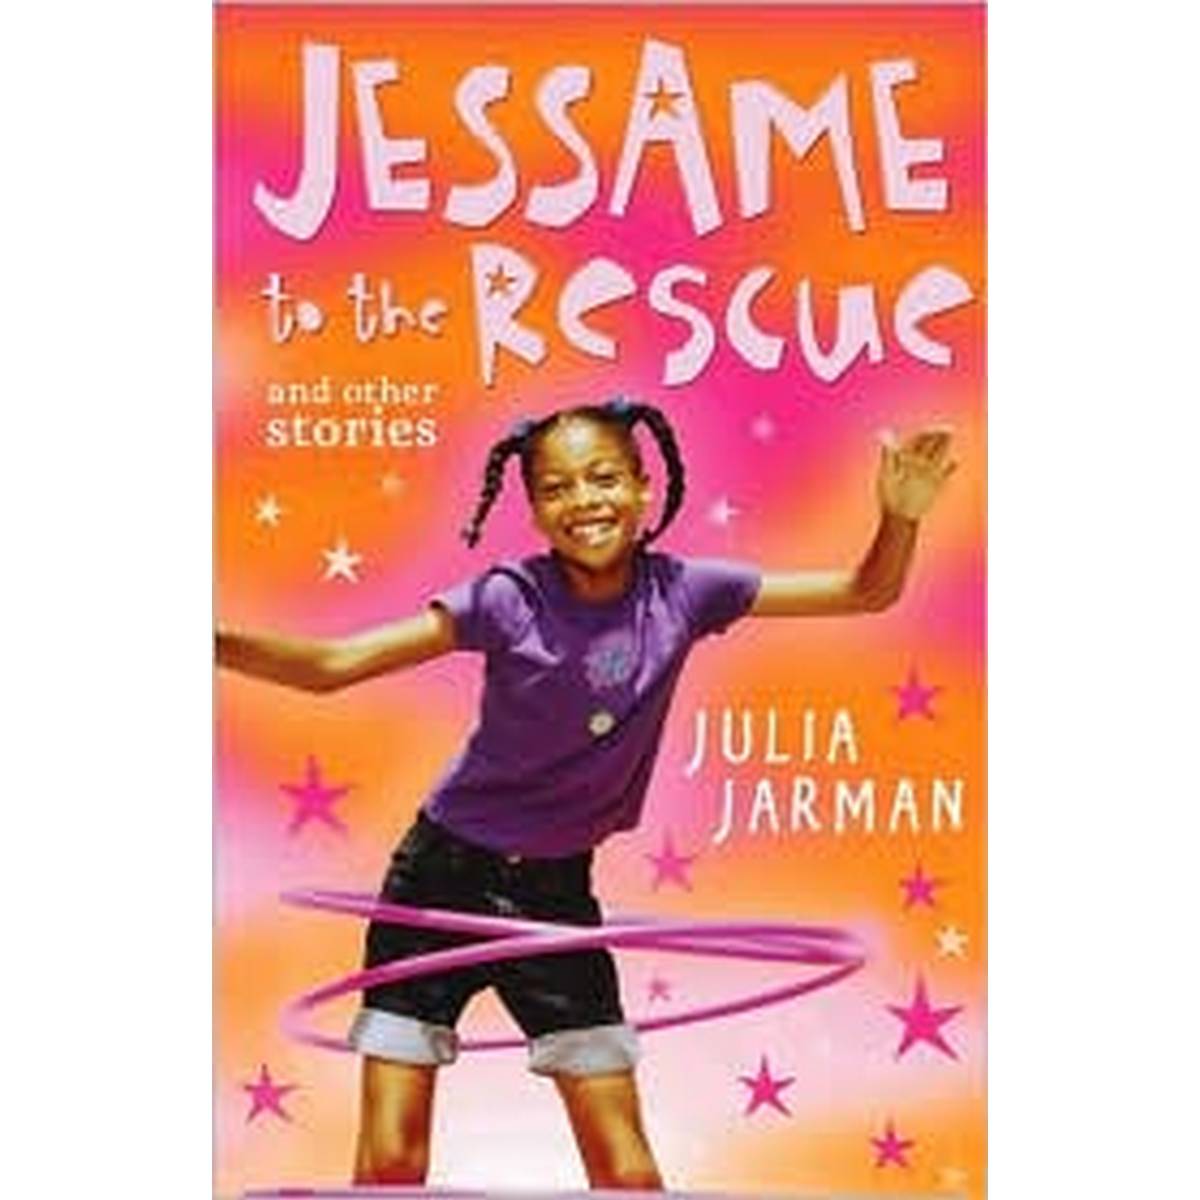 Jessame to the Rescue and Other Stories